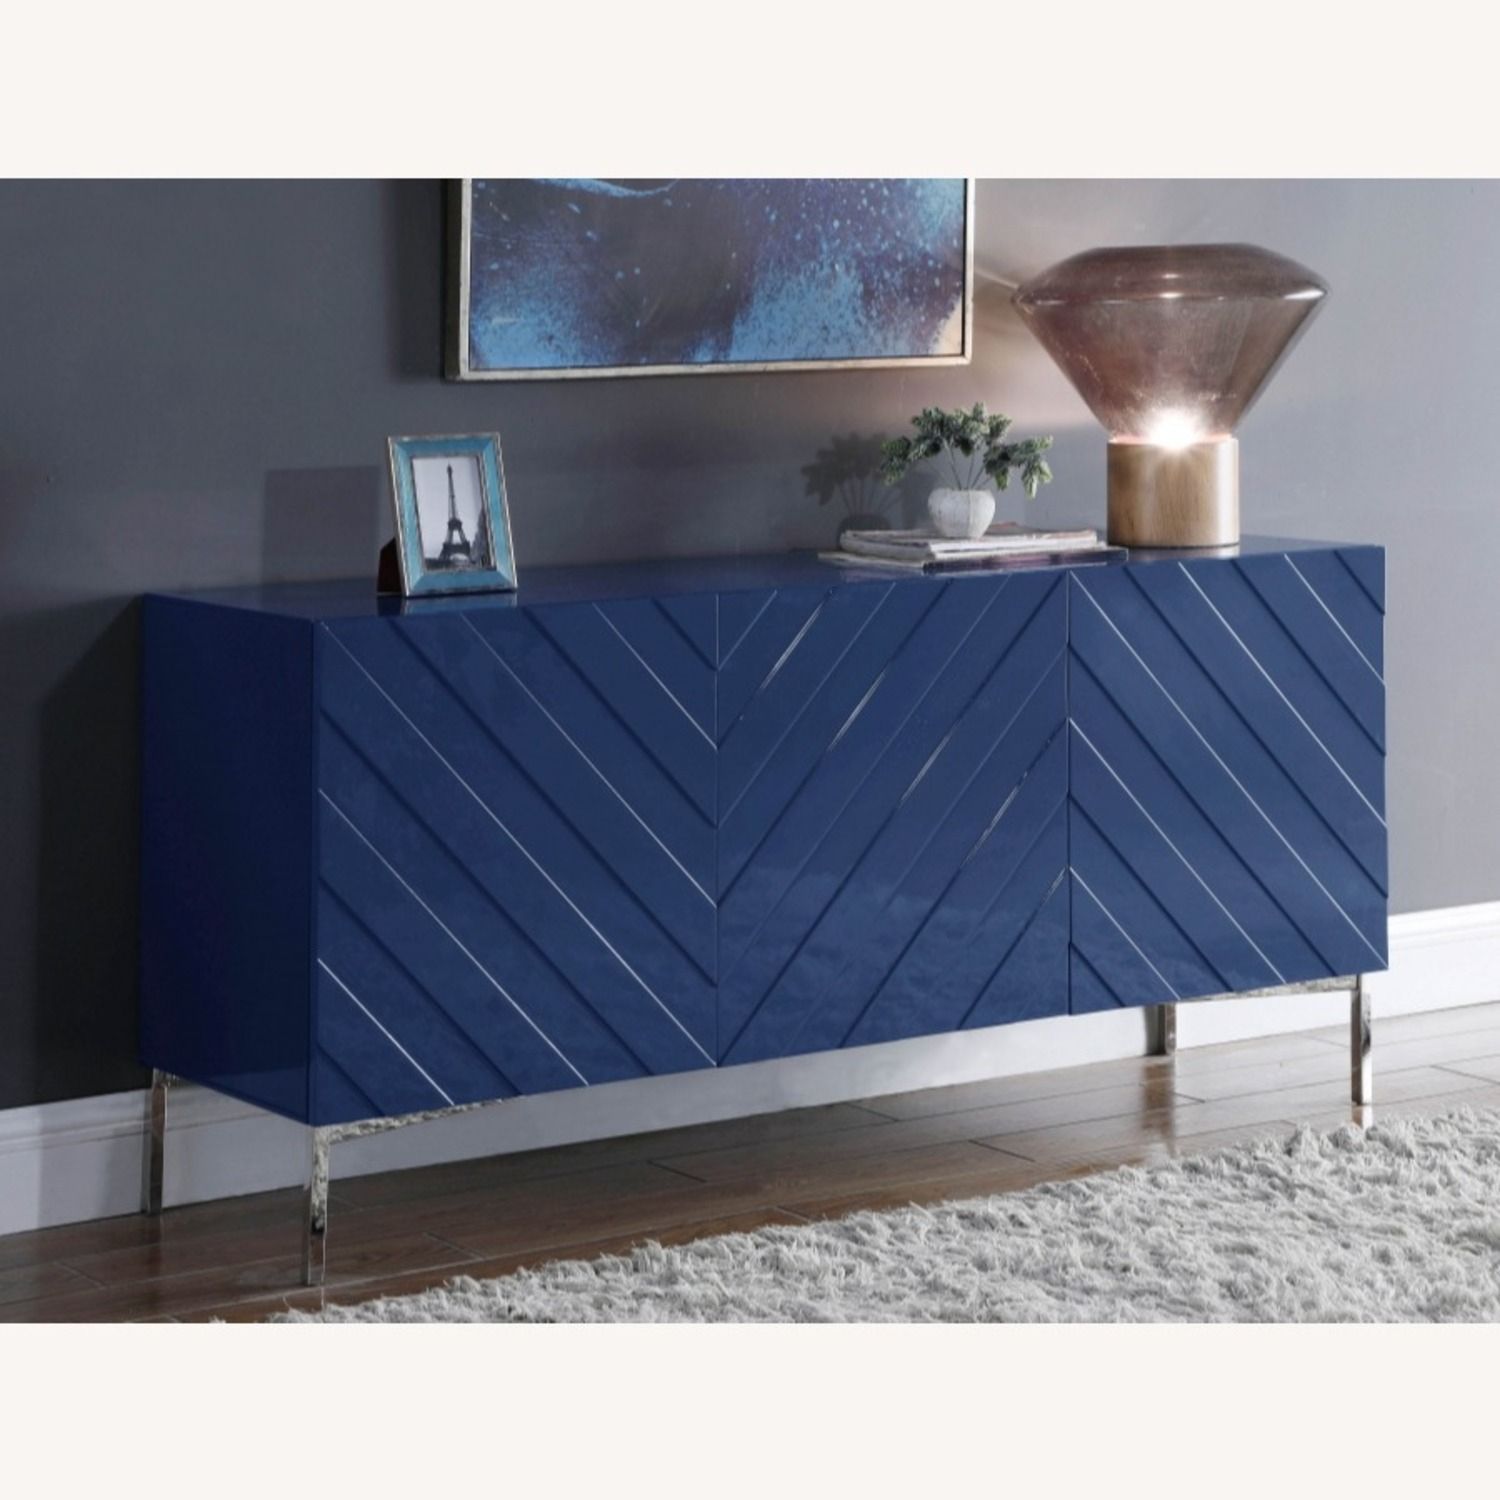 Sideboard In Navy Blue Lacquer & Chrome Base – Aptdeco With 2018 Navy Blue Sideboards (View 13 of 15)